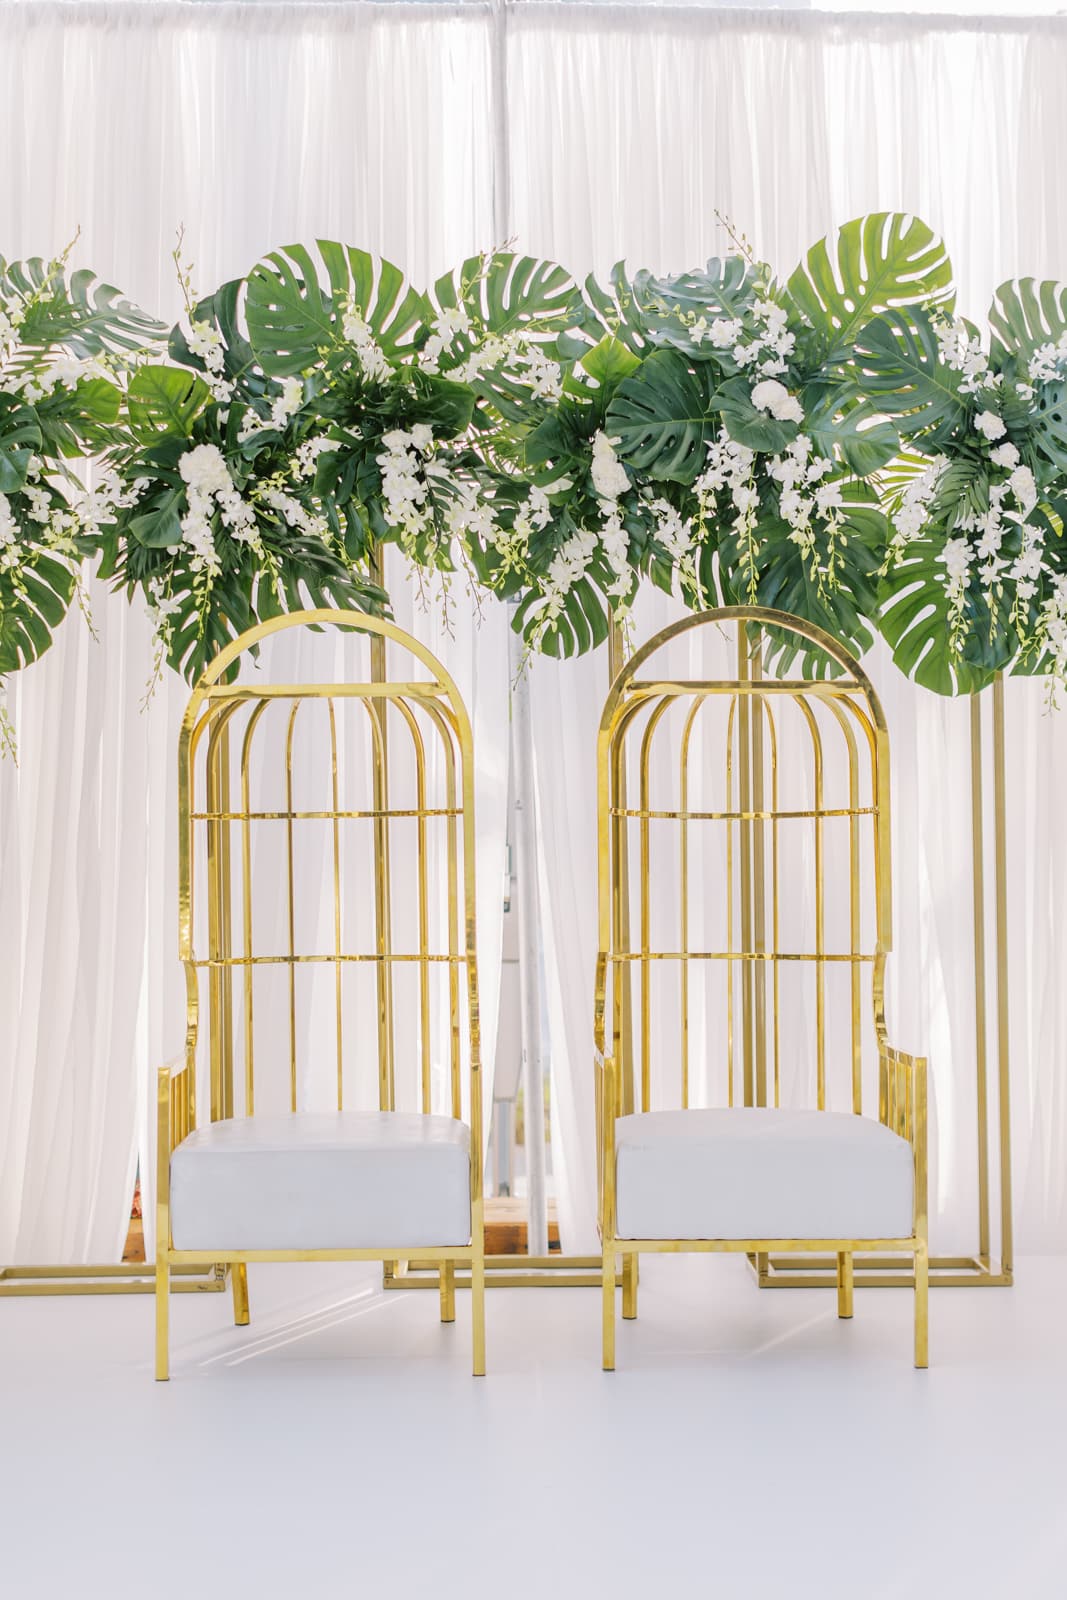 Golden head chairs for a wedding with tropical leafs hanging over the top